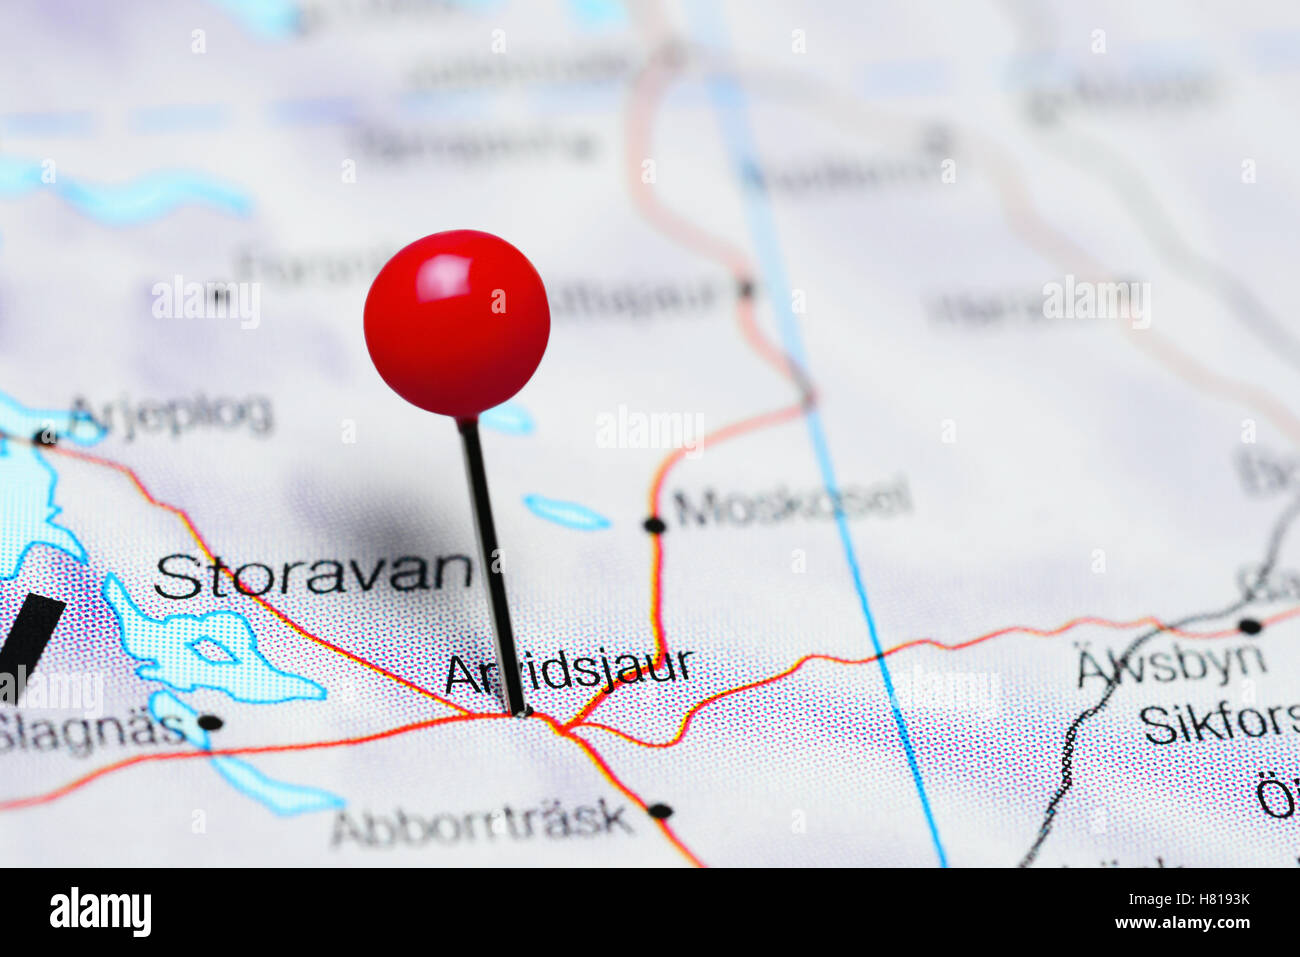 Arvidsjaur pinned on a map of Sweden Stock Photo